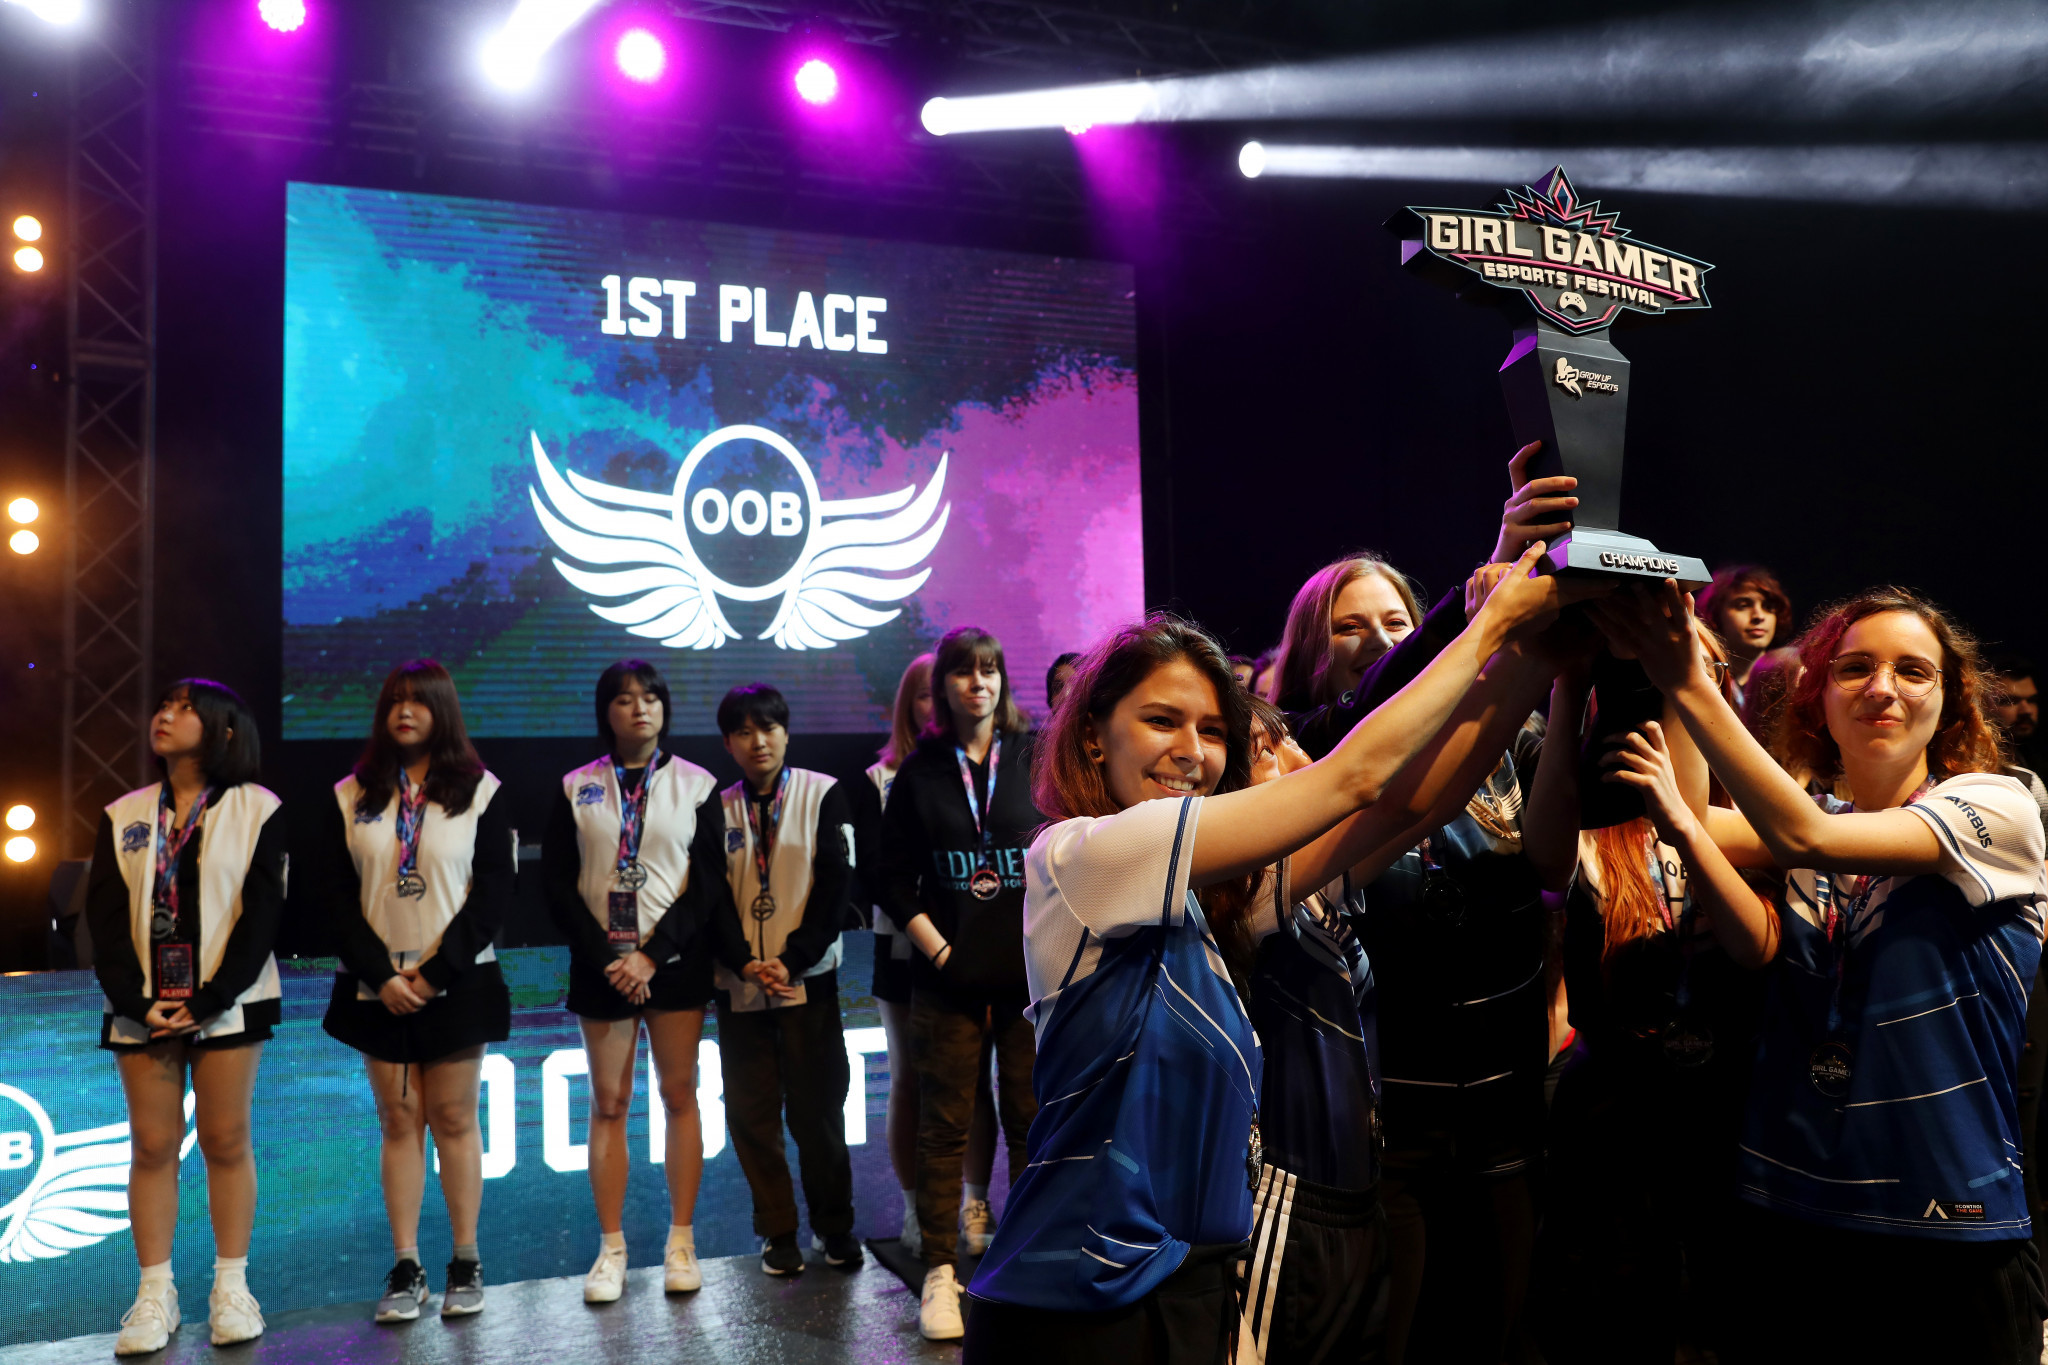 GIRLGAMER organises numerous women's events globally ©Getty Images